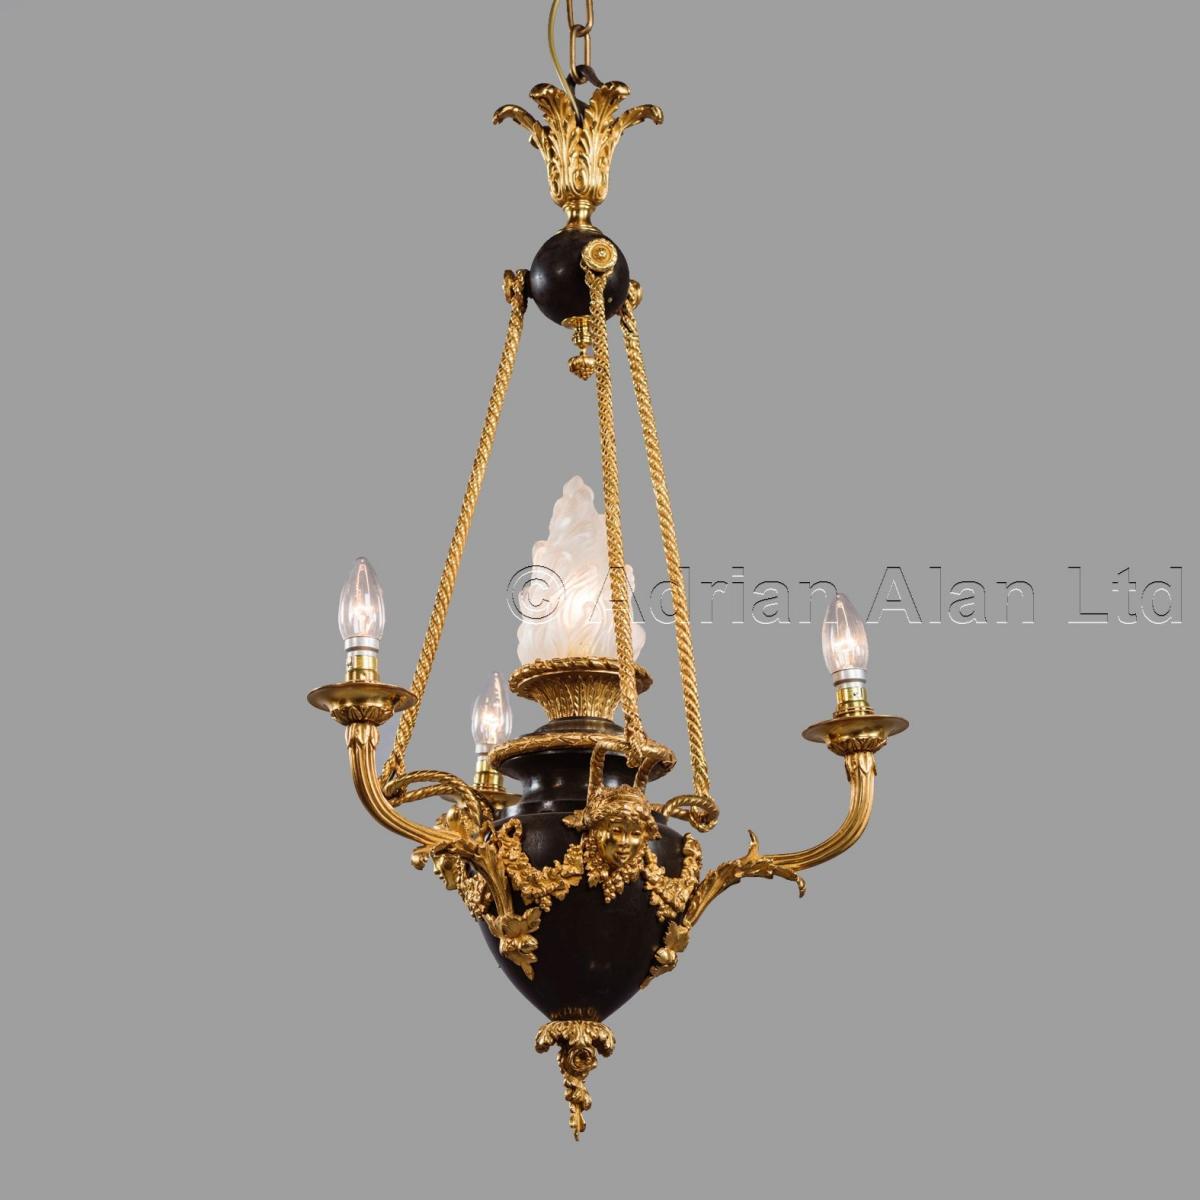 A Louis XVI Style Gilt and Patinated Bronze Four-Light Chandelier ©AdrianAlanLtd